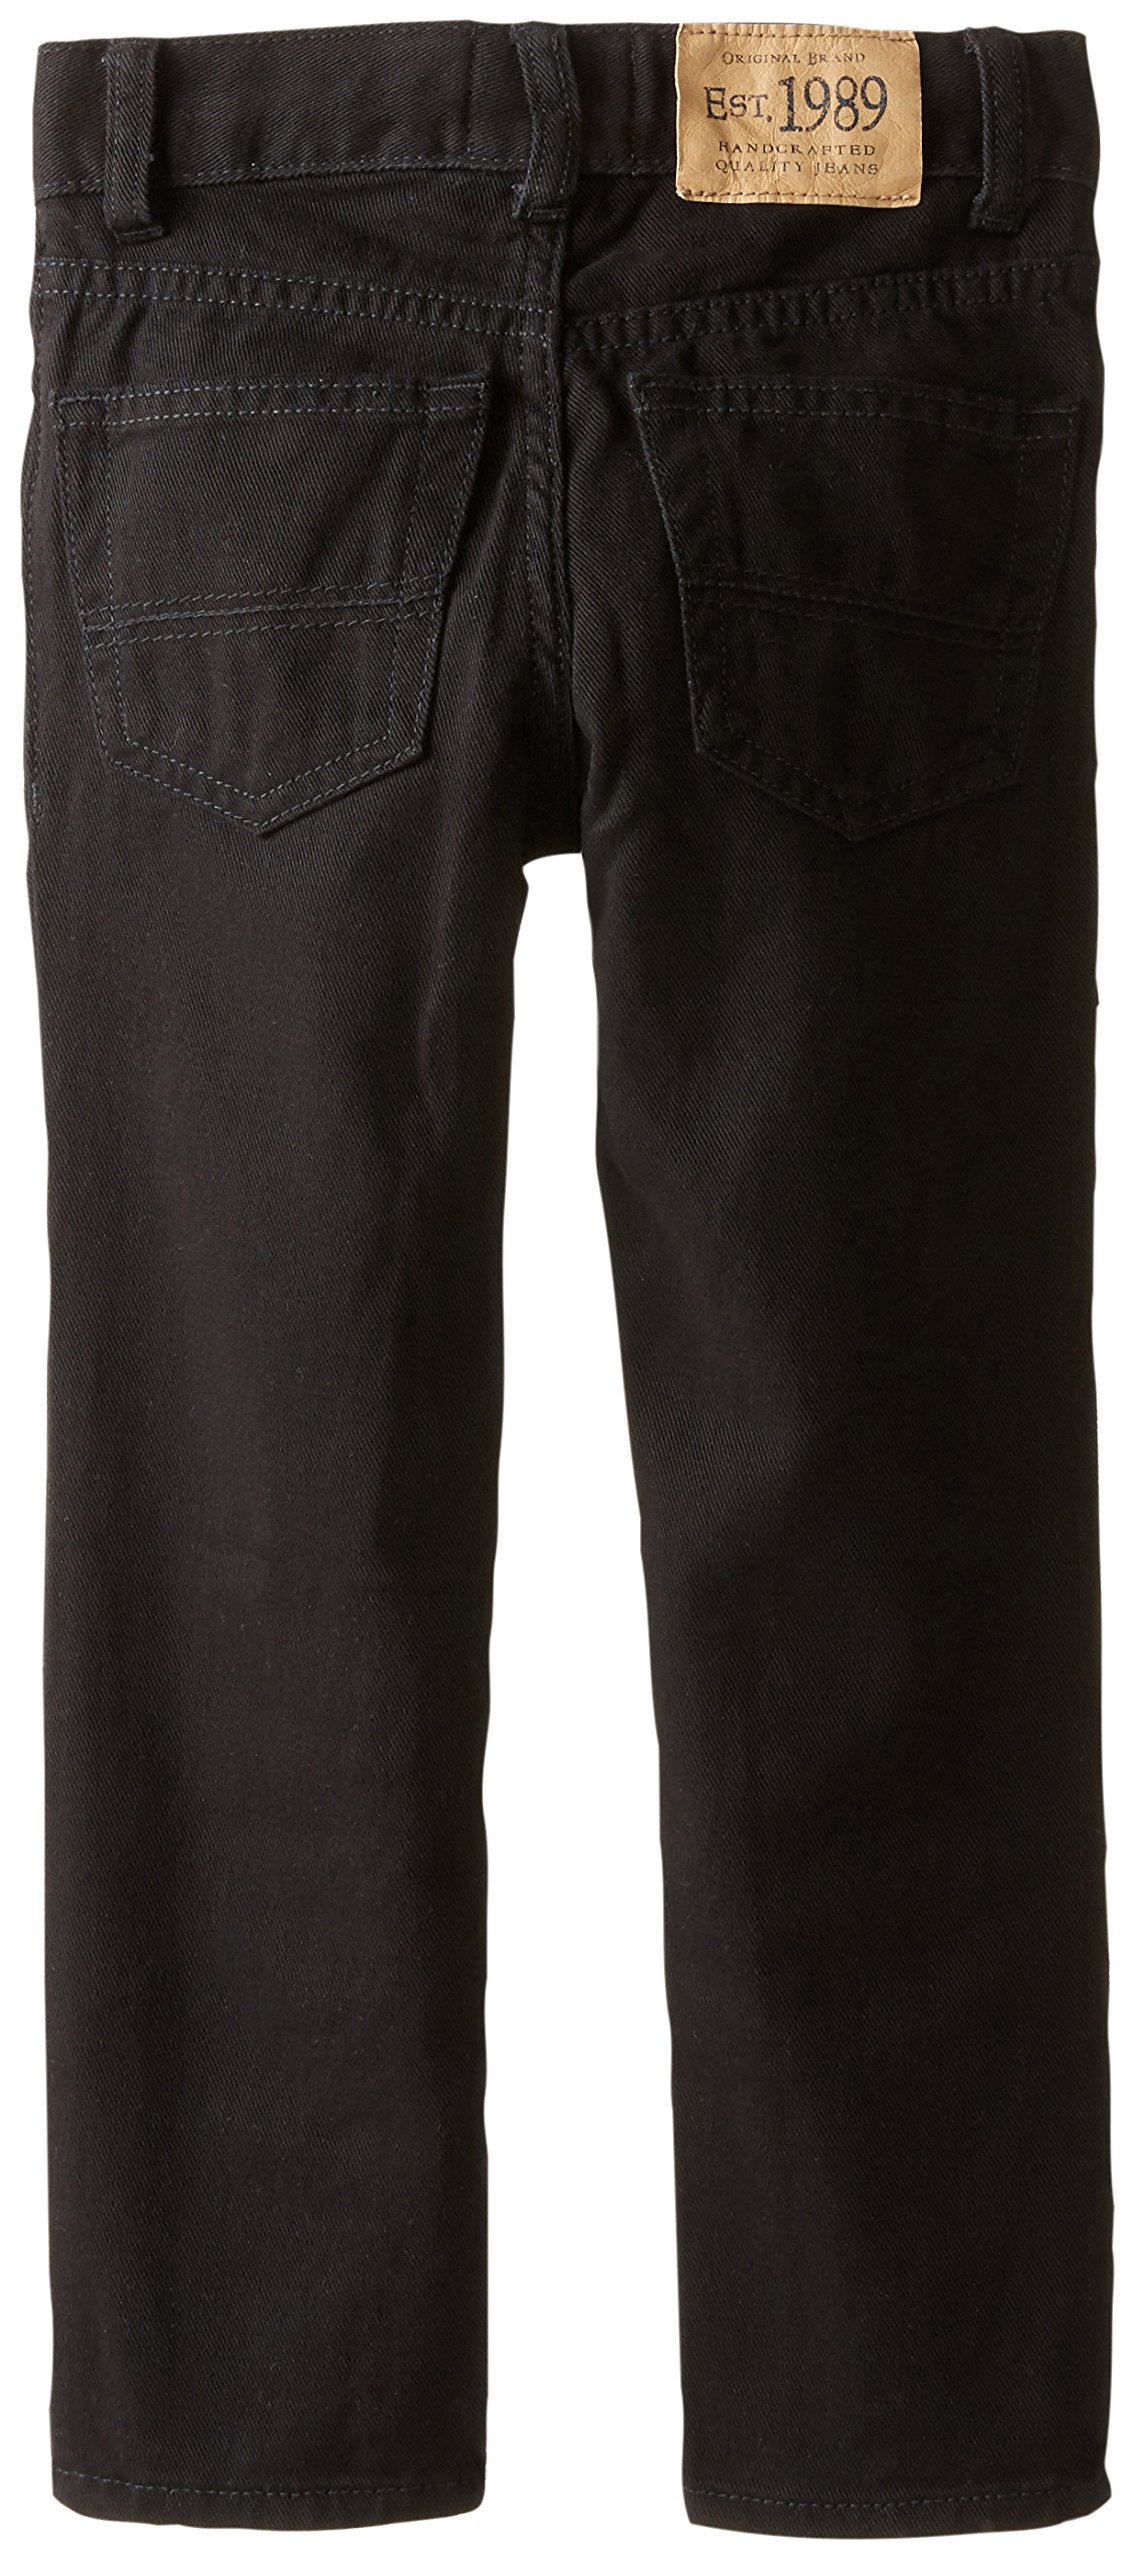 The Children's Place Boy's Basic Skinny Jeans Pants (pack of 1)